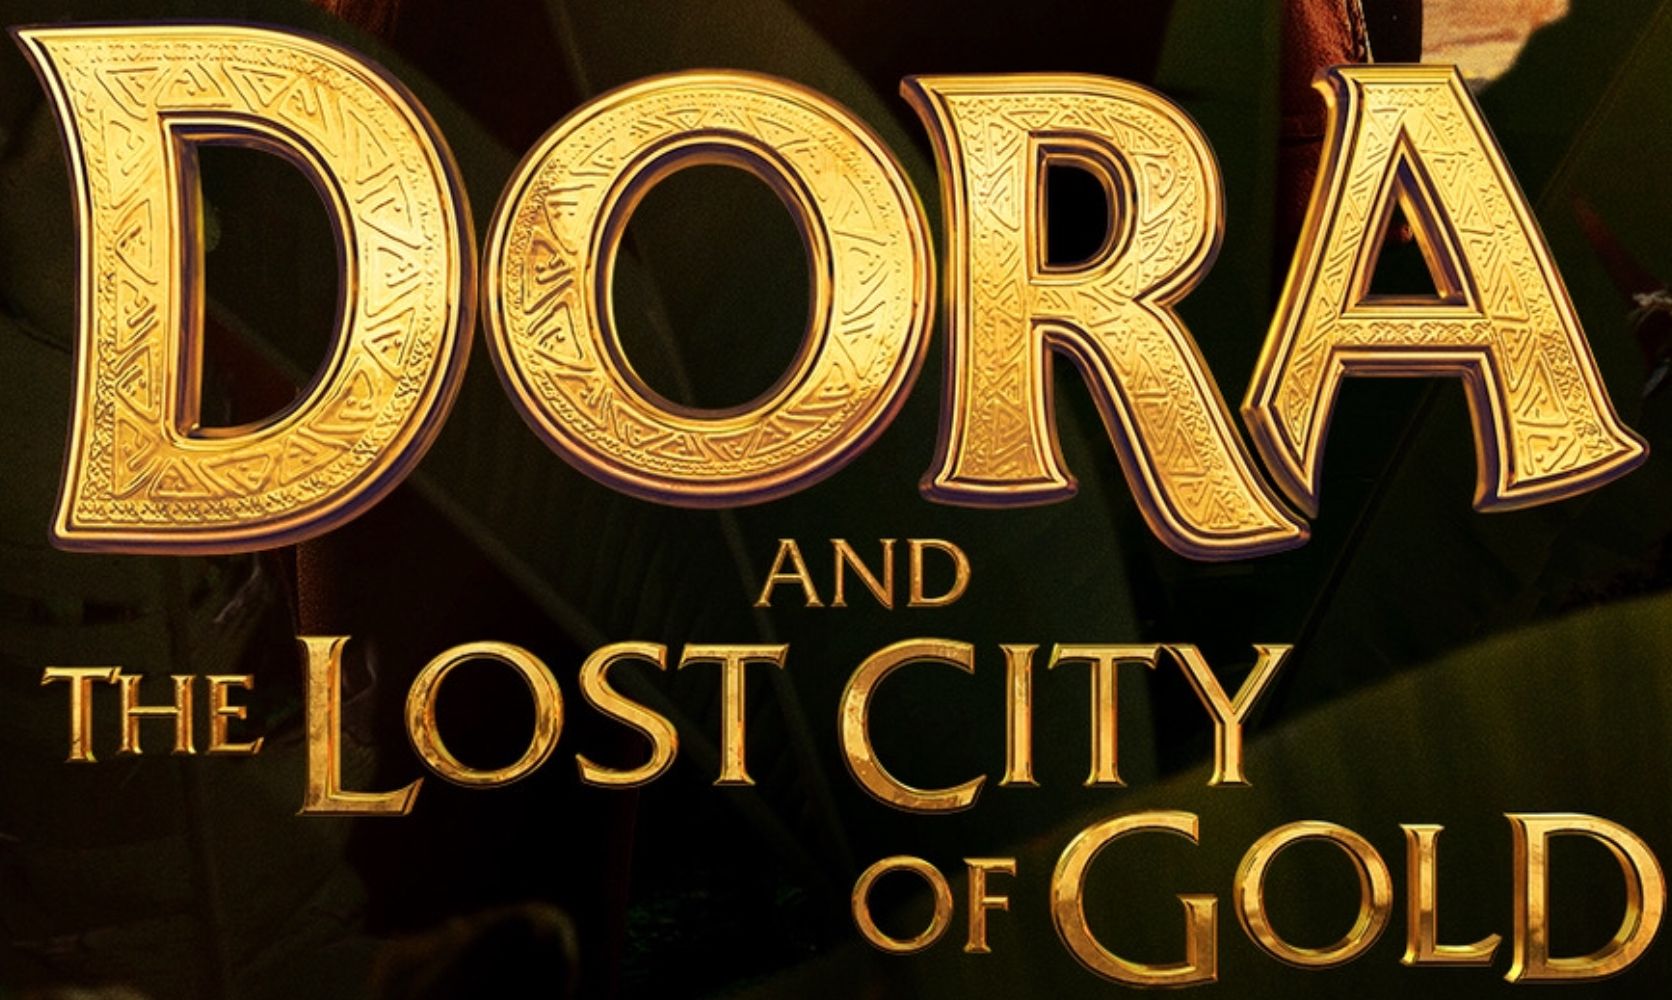 City of gold. The Lost City of Gold. Dora Lost City. Dora and the Lost City of Gold игрушки. Dora and the Lost City of Gold Постер.